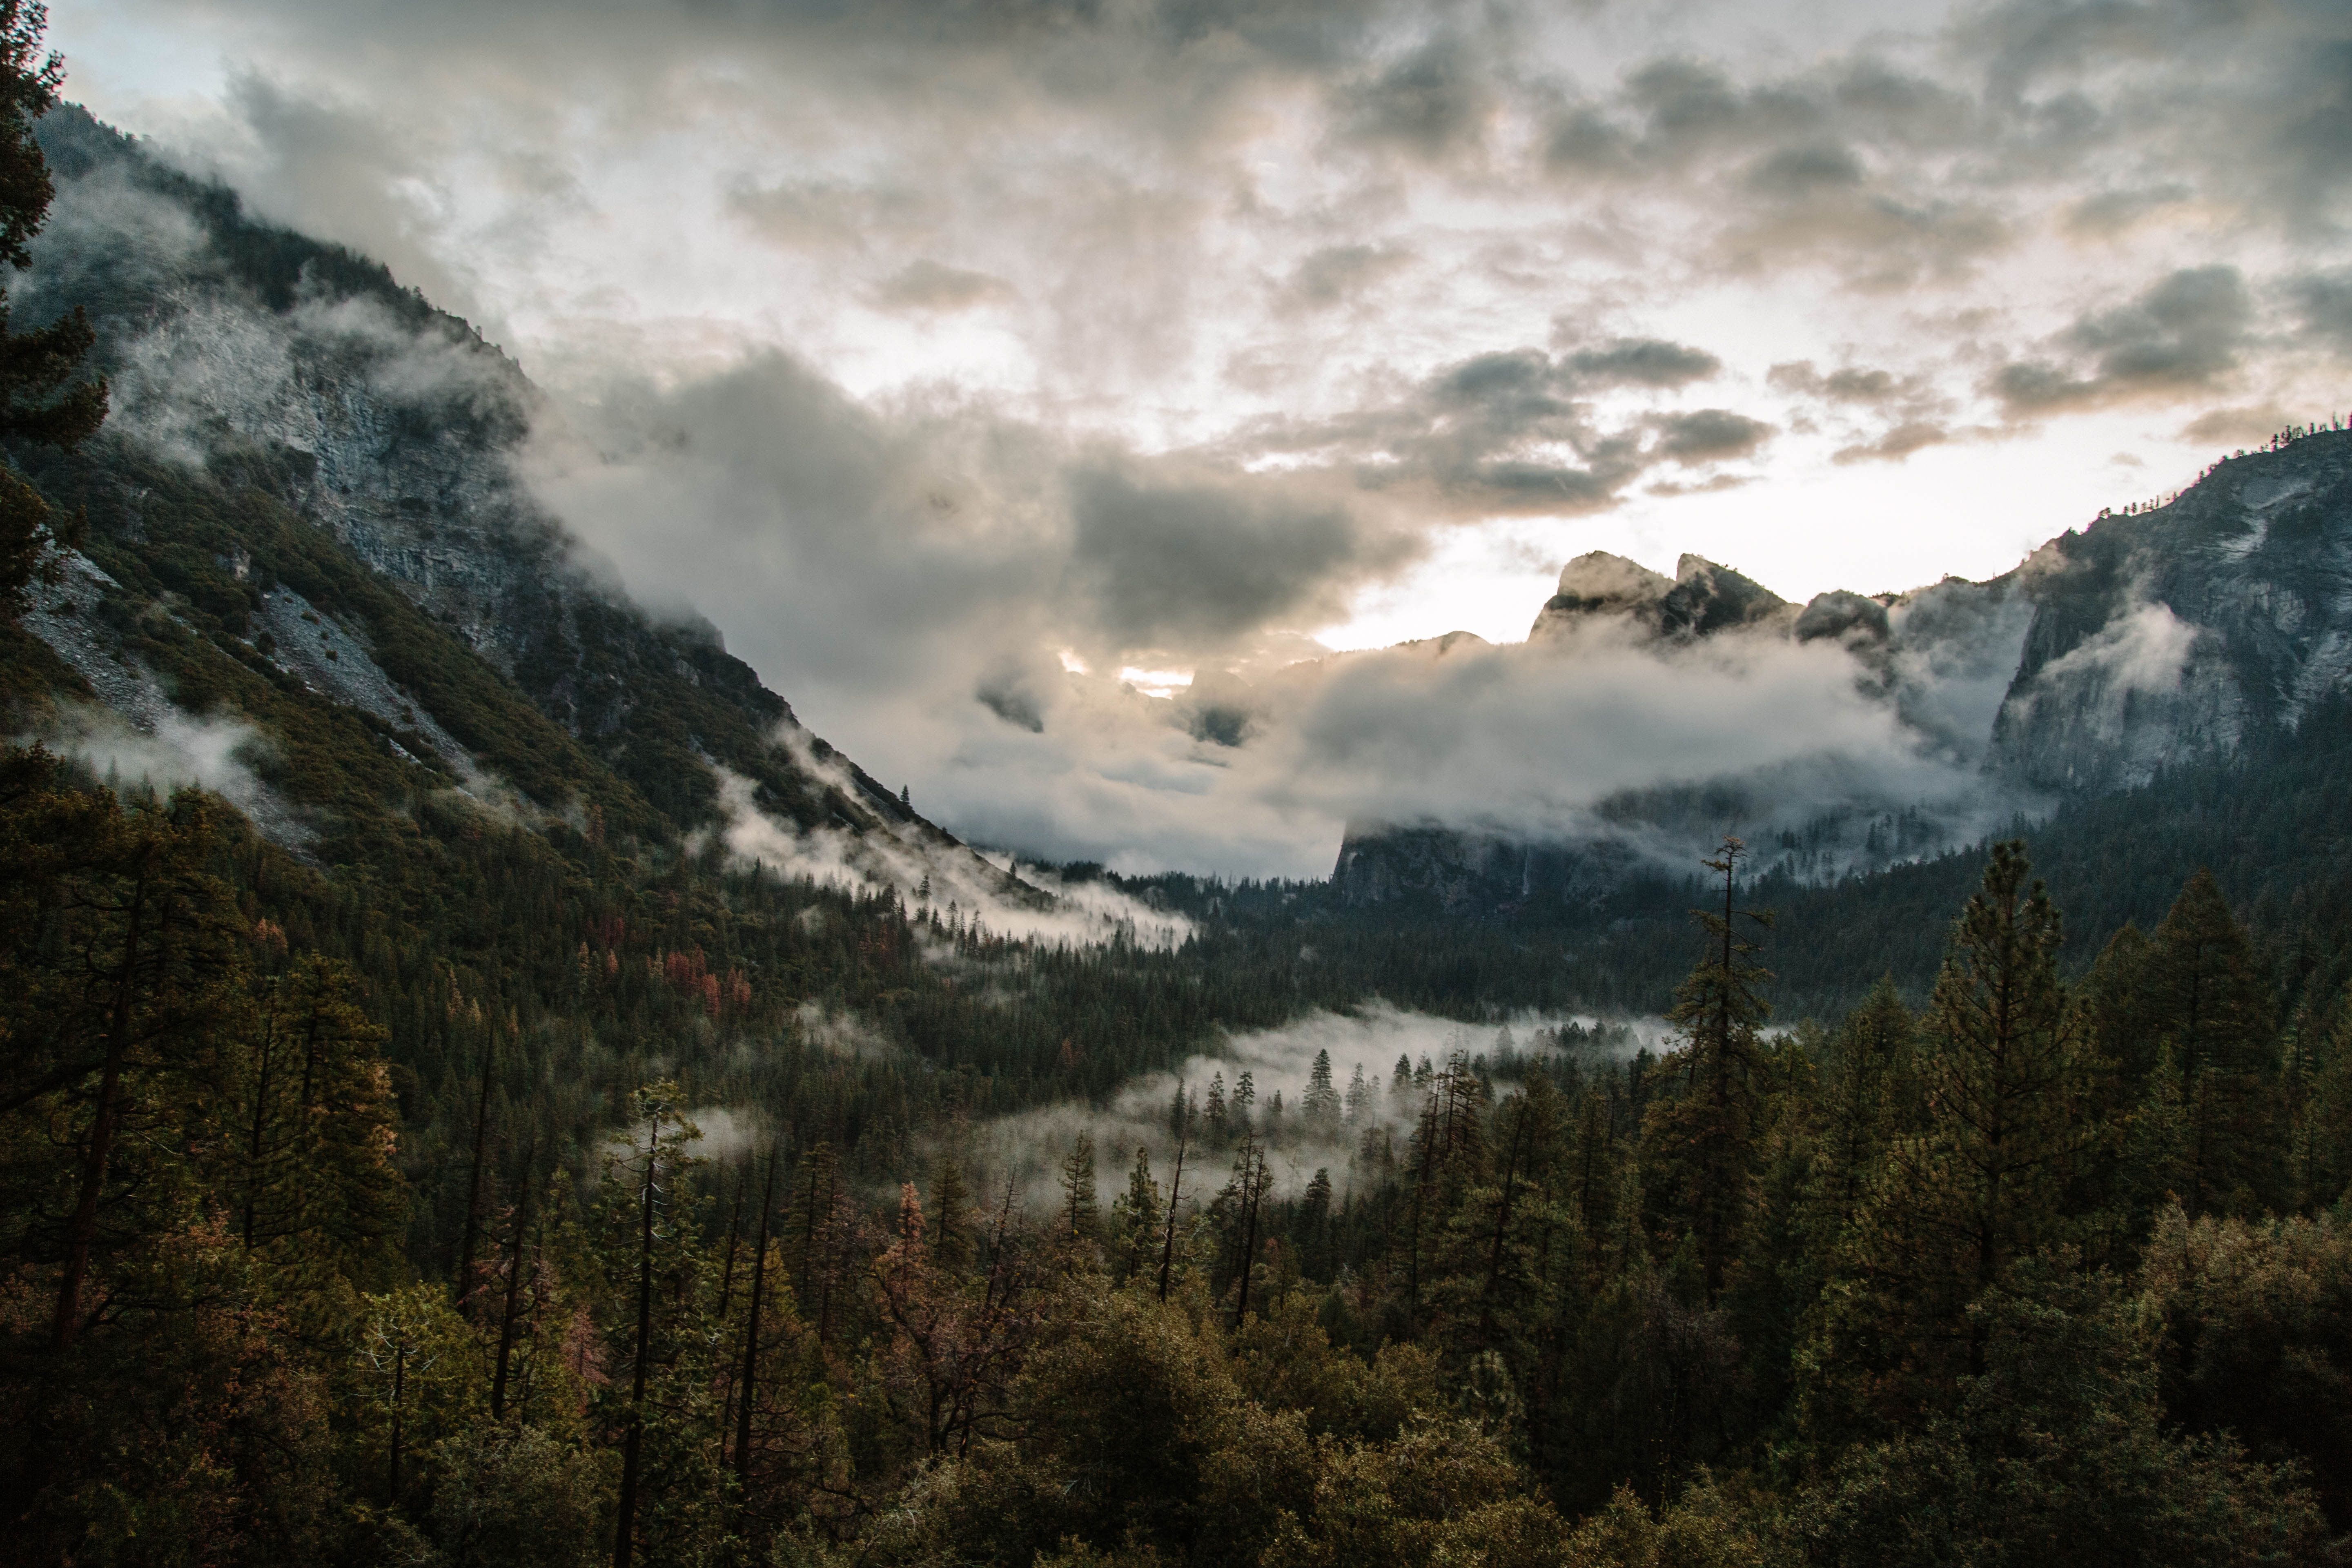 5760x3840 #Free , #mist, #hiking, #winteriscoming, #vsco, #camping, #northface, #valley, #pine